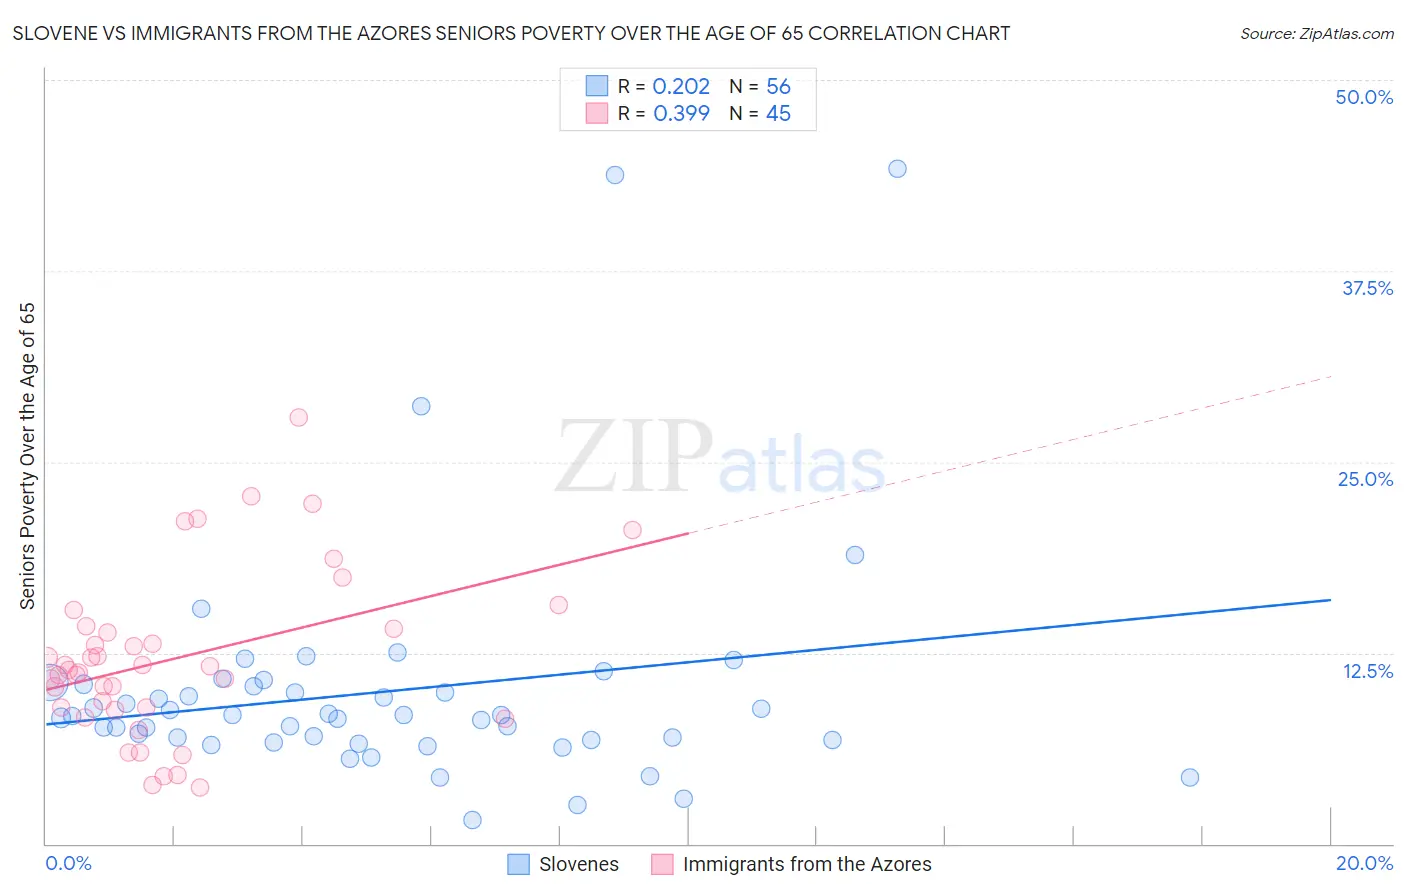 Slovene vs Immigrants from the Azores Seniors Poverty Over the Age of 65